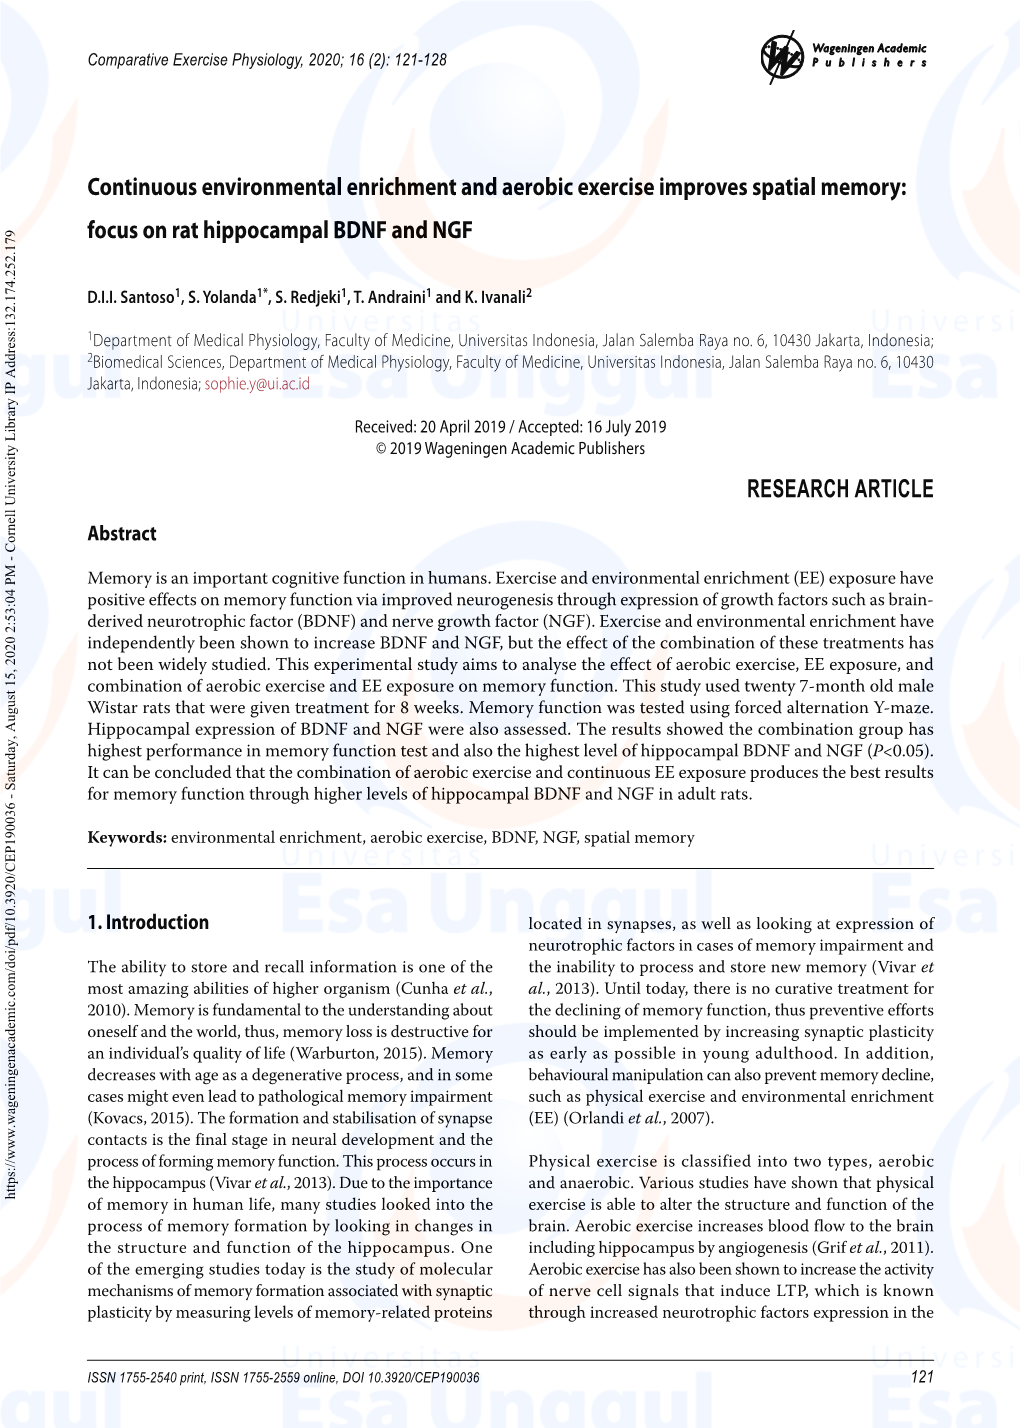 Focus on Rat Hippocampal BDNF and NGF